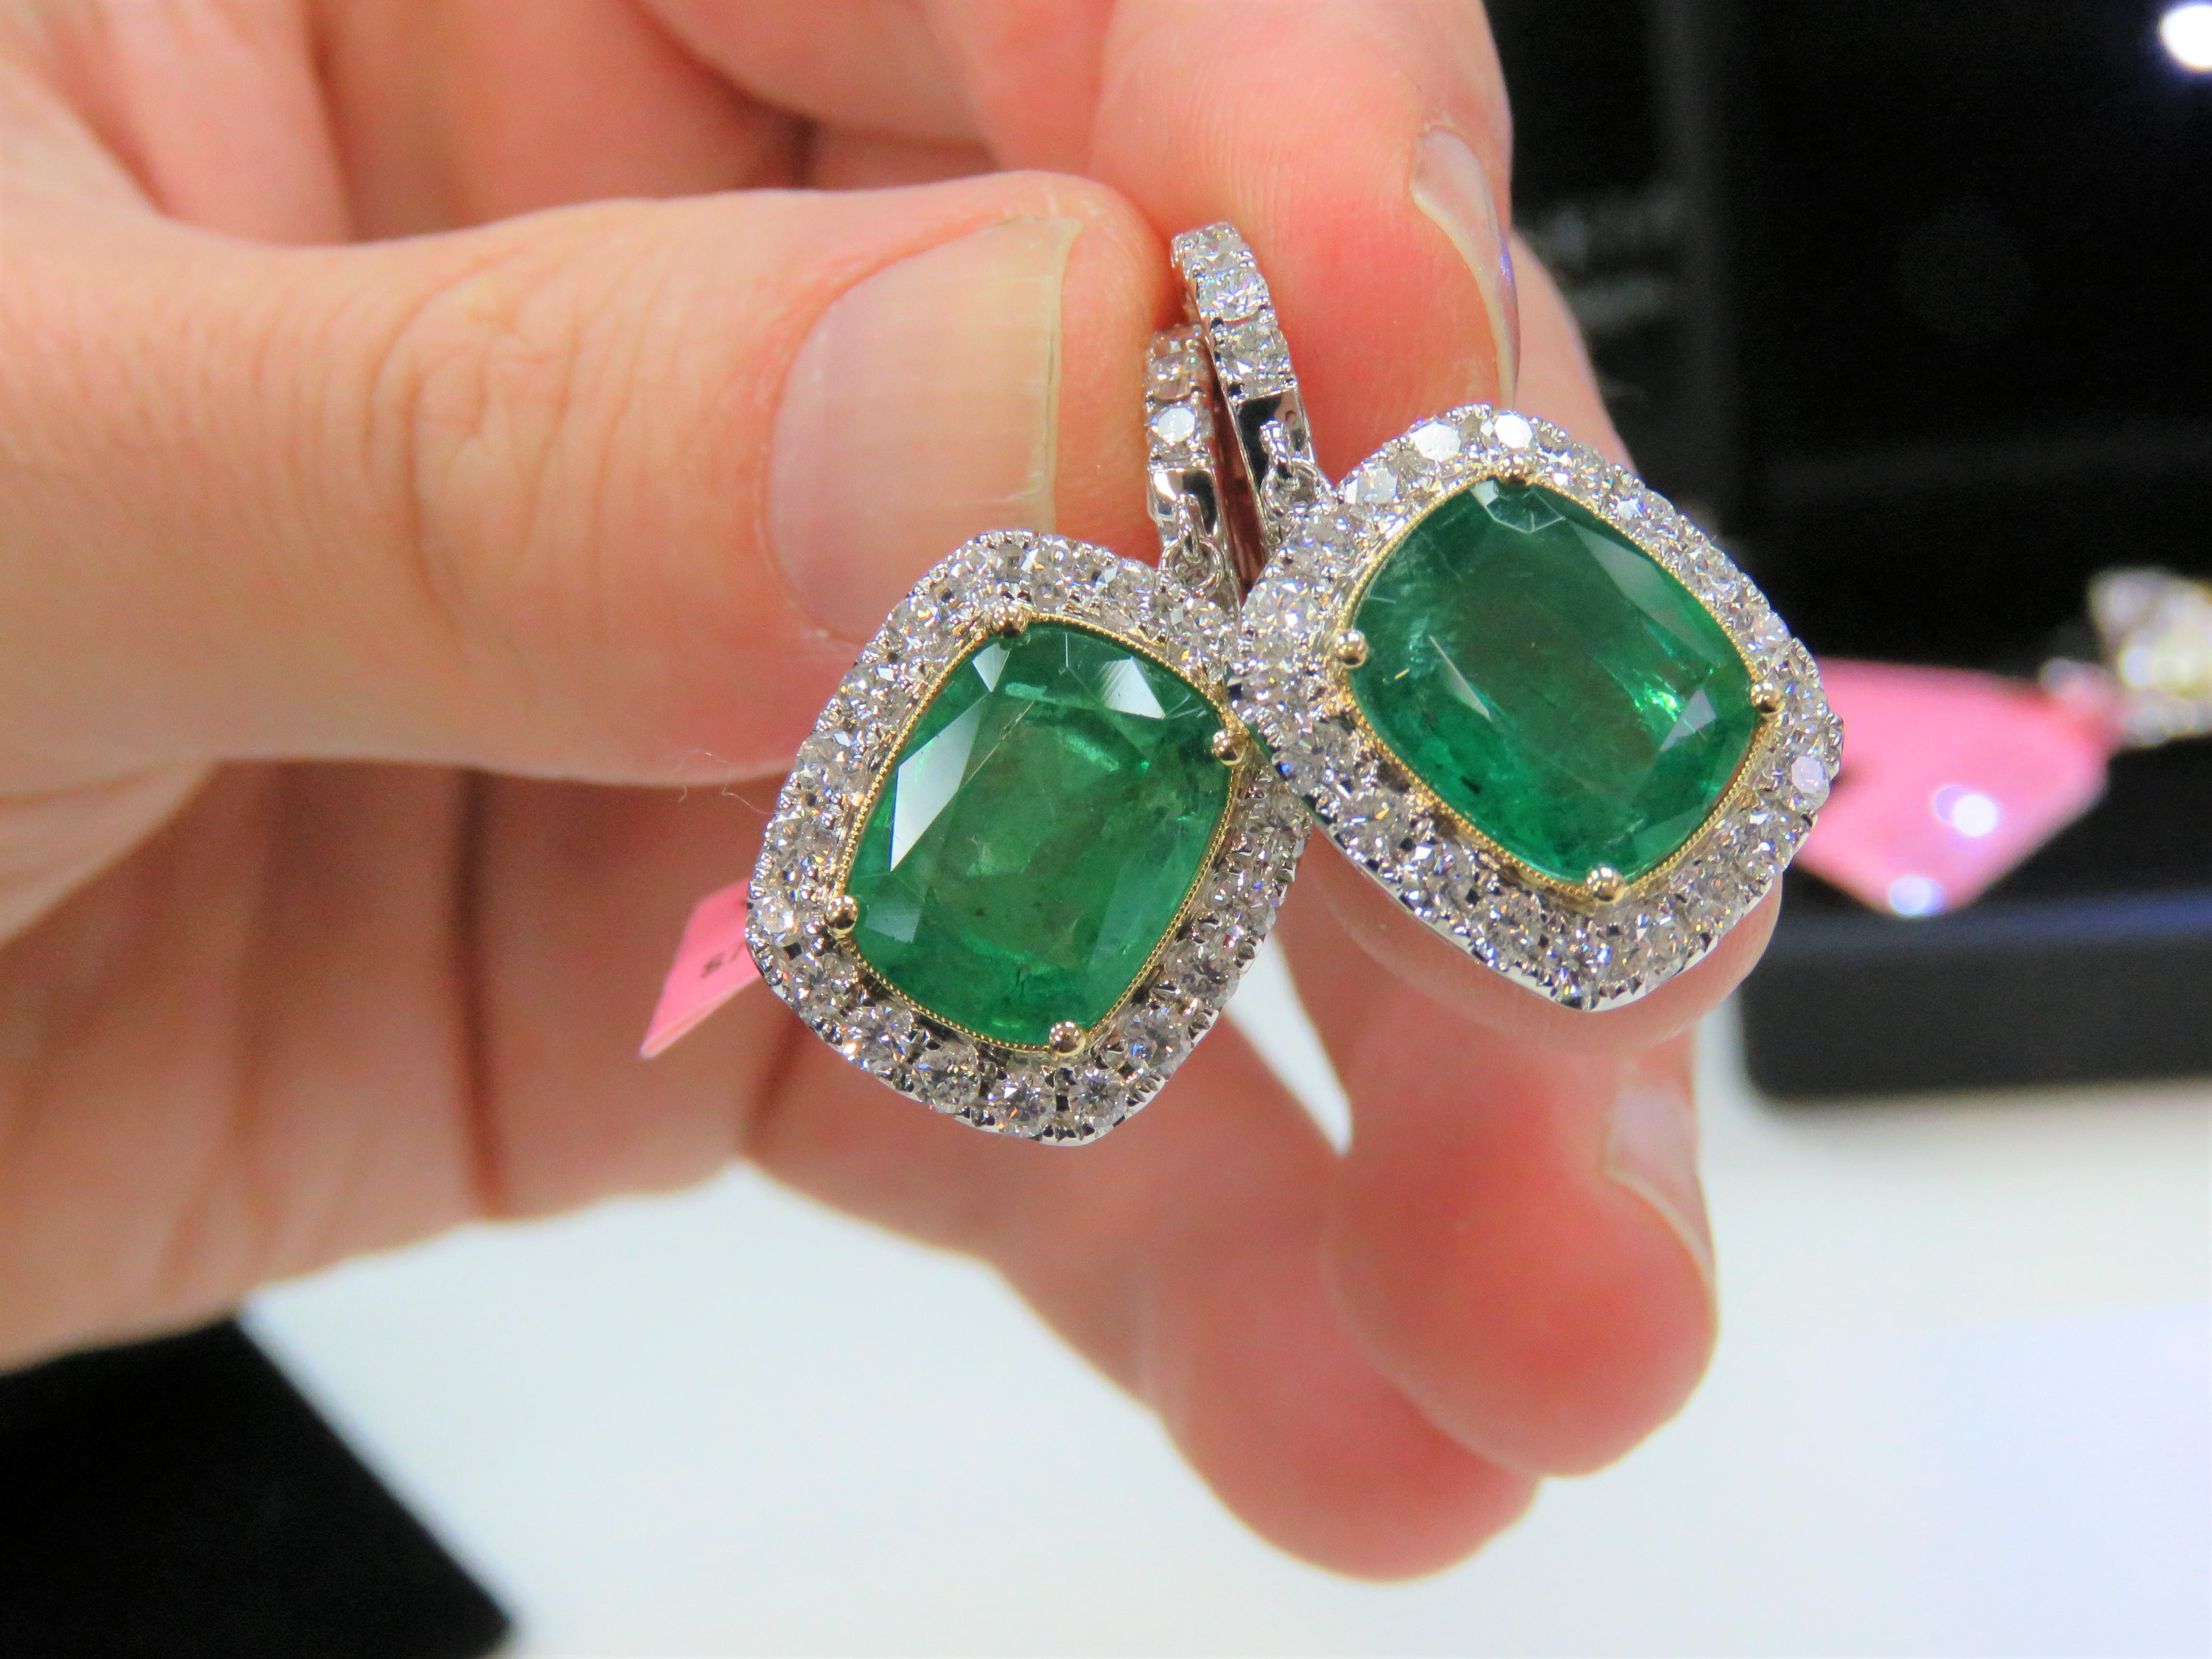 The Following Items we are offering is a Pair of Rare 18KT Gold Large Emerald Diamond Dangle Earrings. Earrings are comprised of Finely Set Gorgeous Large Gorgeous Green Emerald Diamond Earrings surrounded with Large Full Cut Round Diamonds!!!